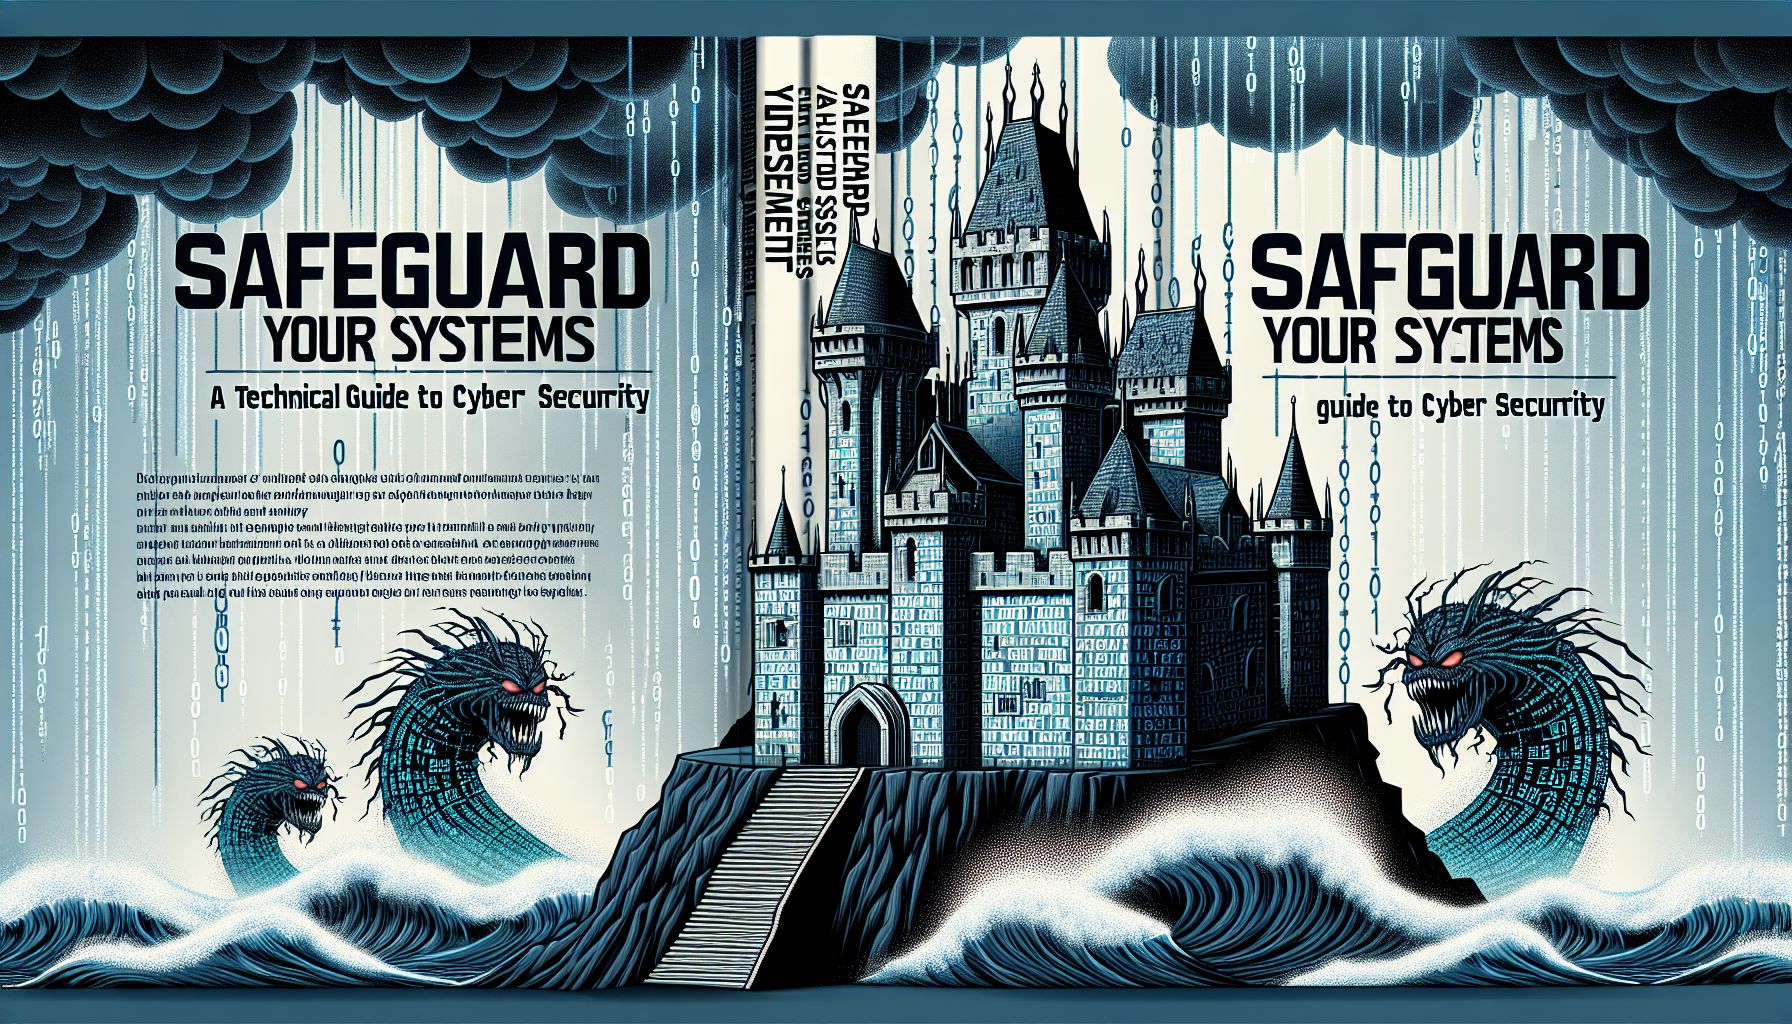 Safeguard Your Systems: A Technical Guide to Cyber Security